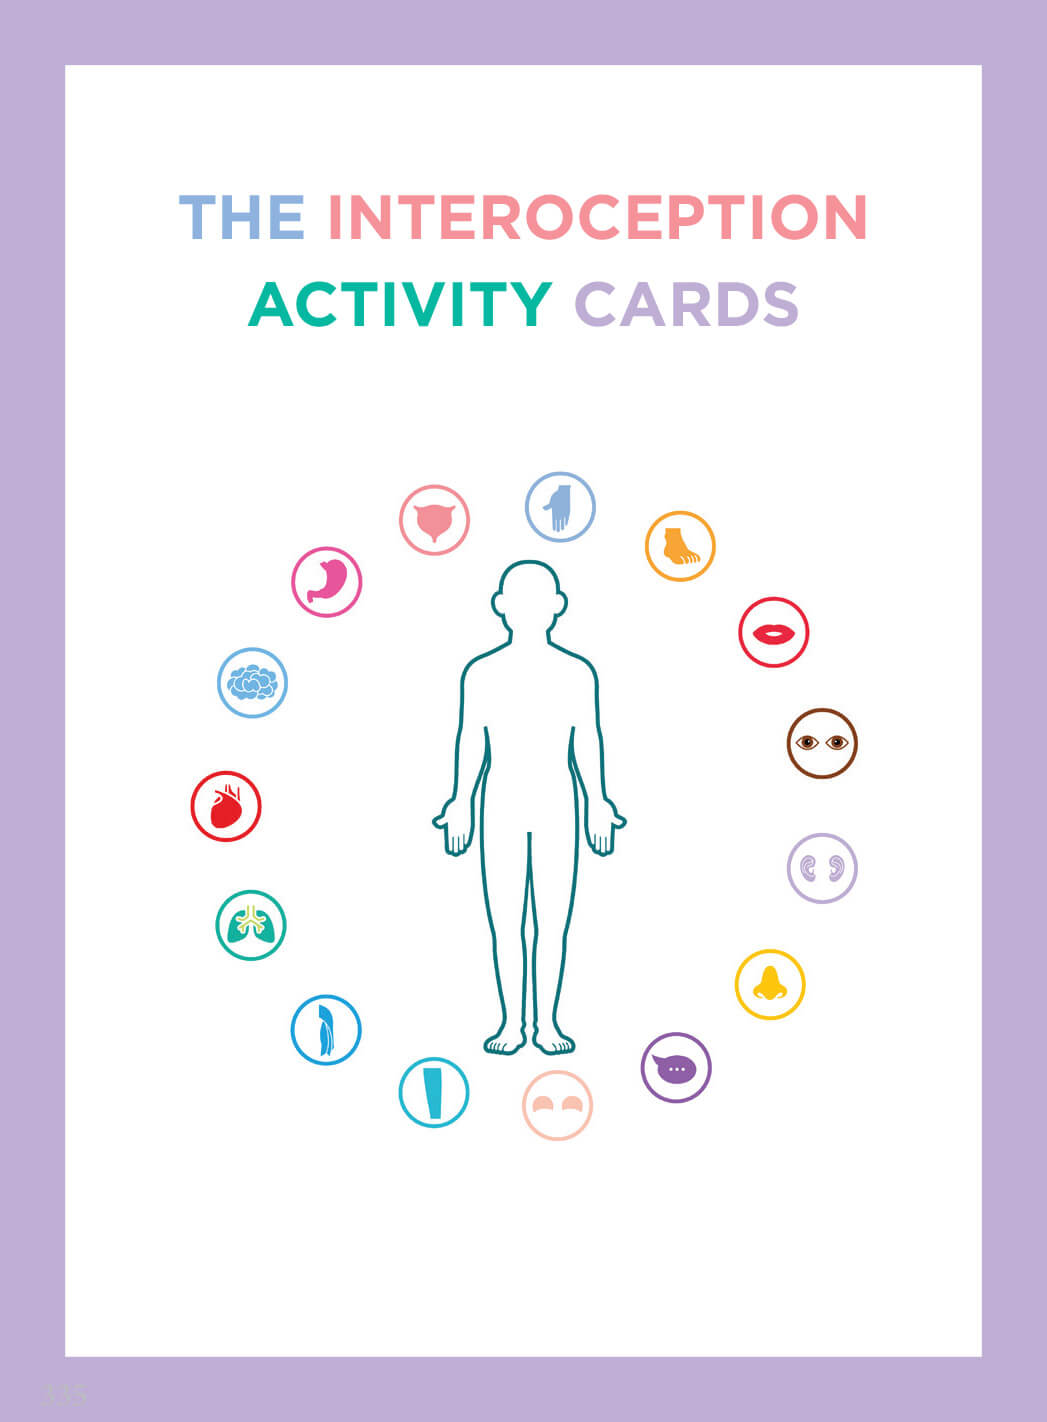 The Interoception Activity Cards